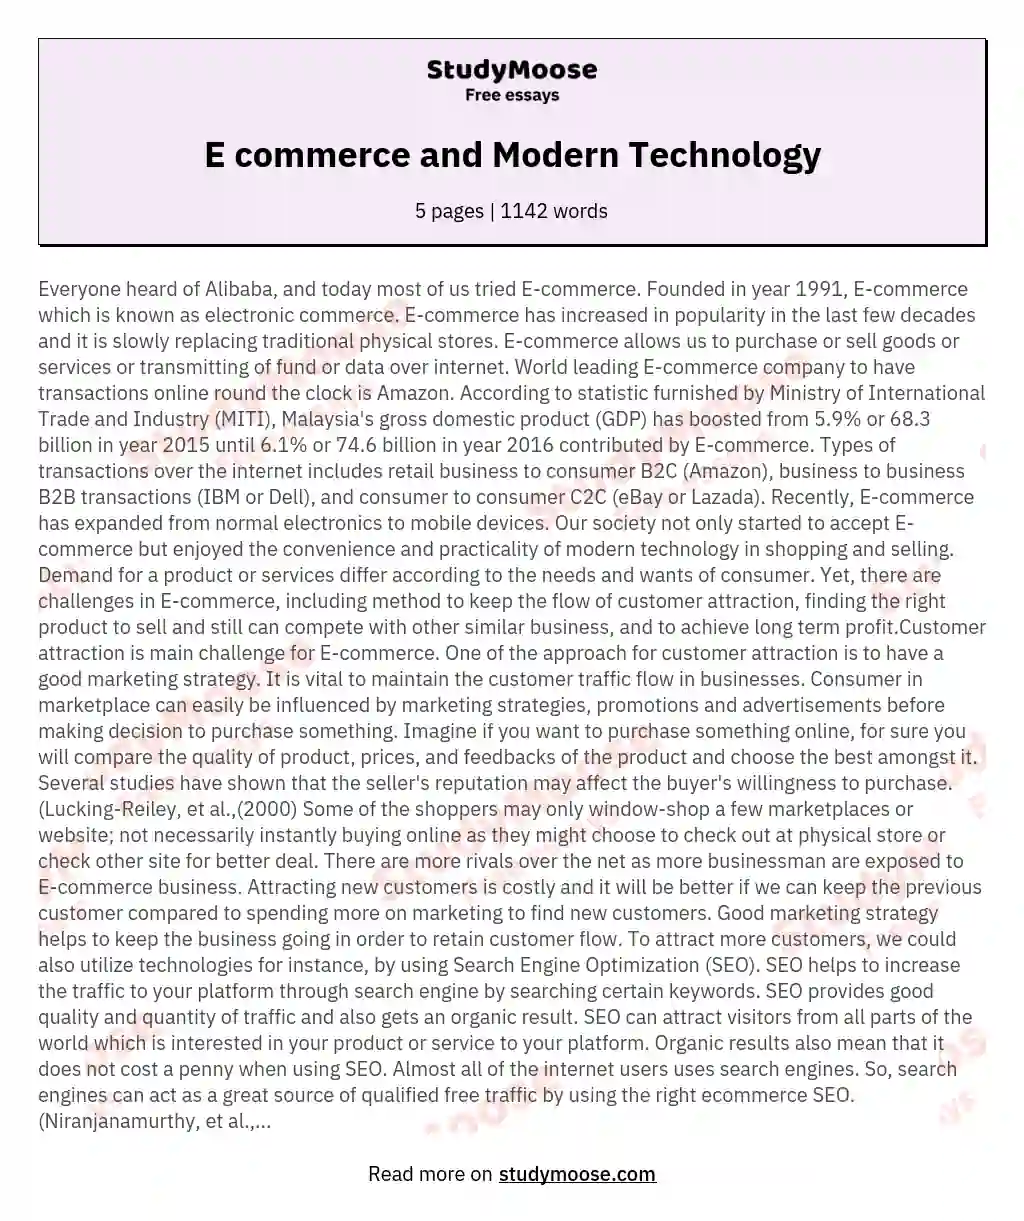 E commerce and Modern Technology essay